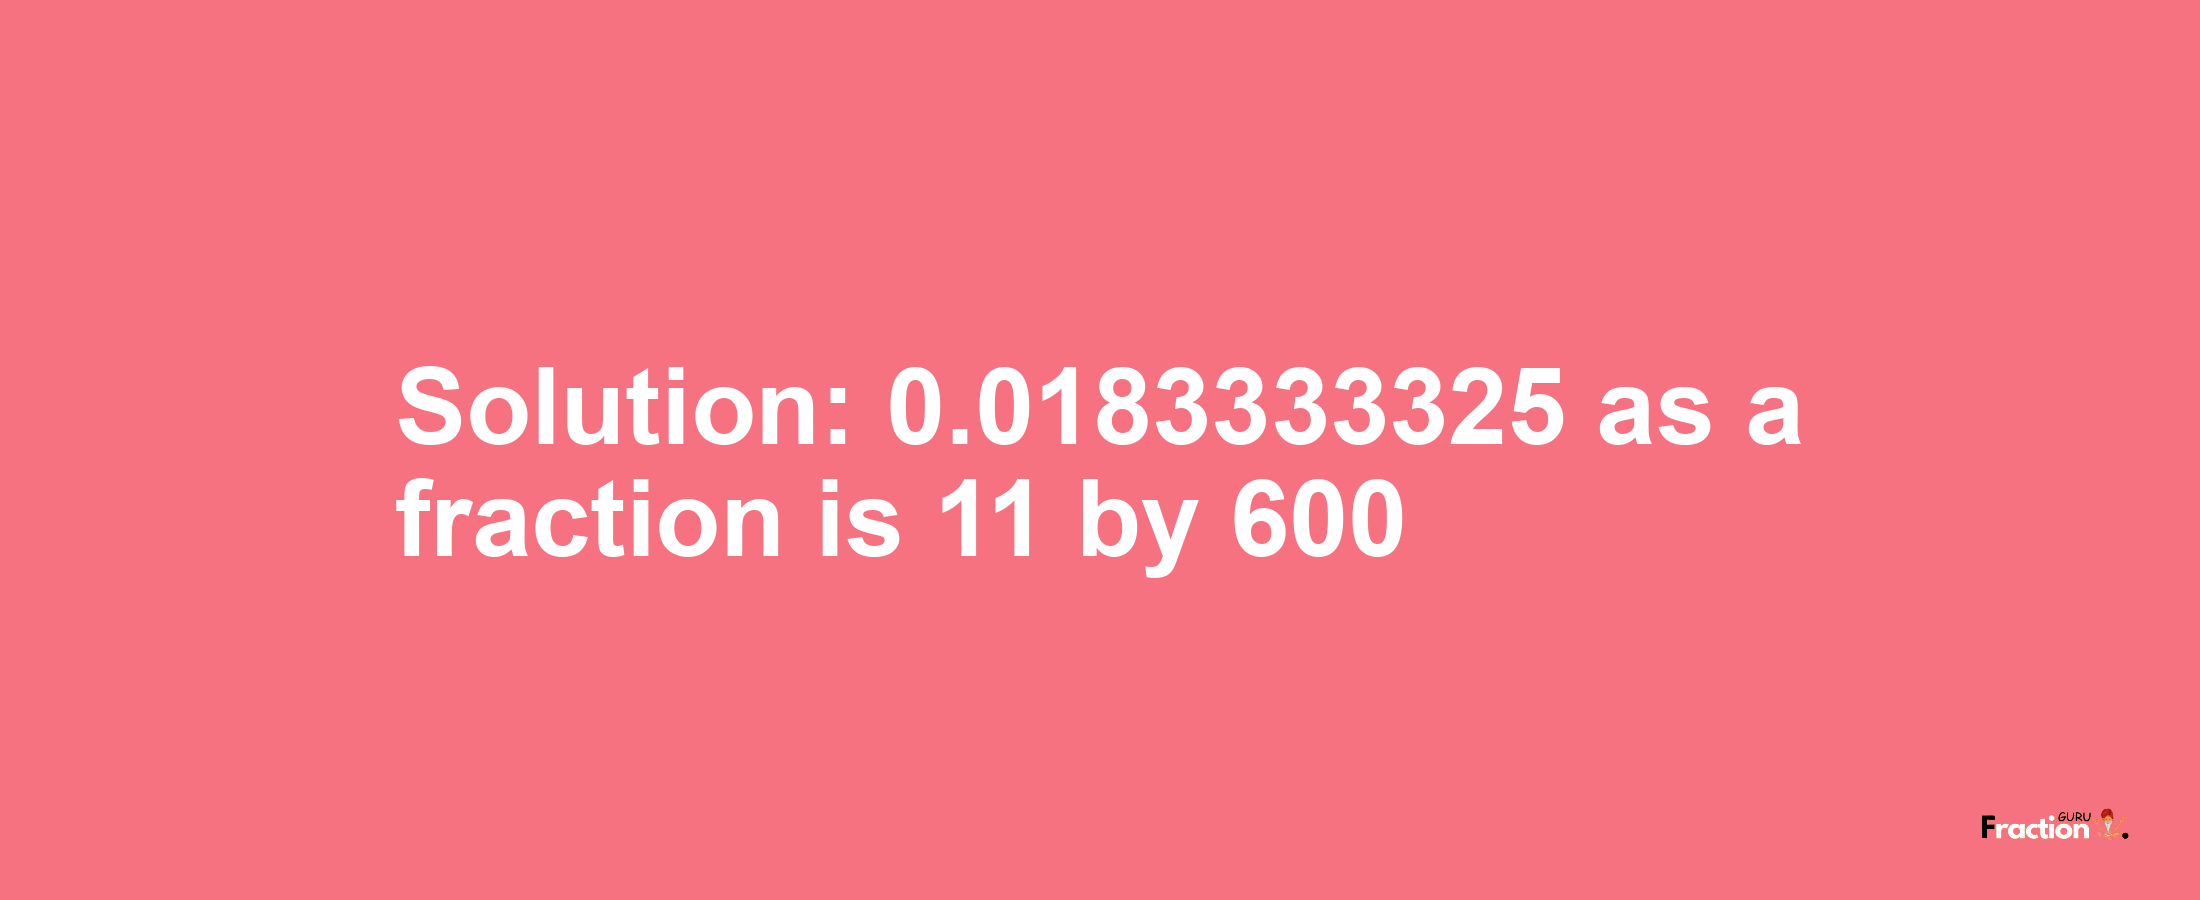 Solution:0.0183333325 as a fraction is 11/600